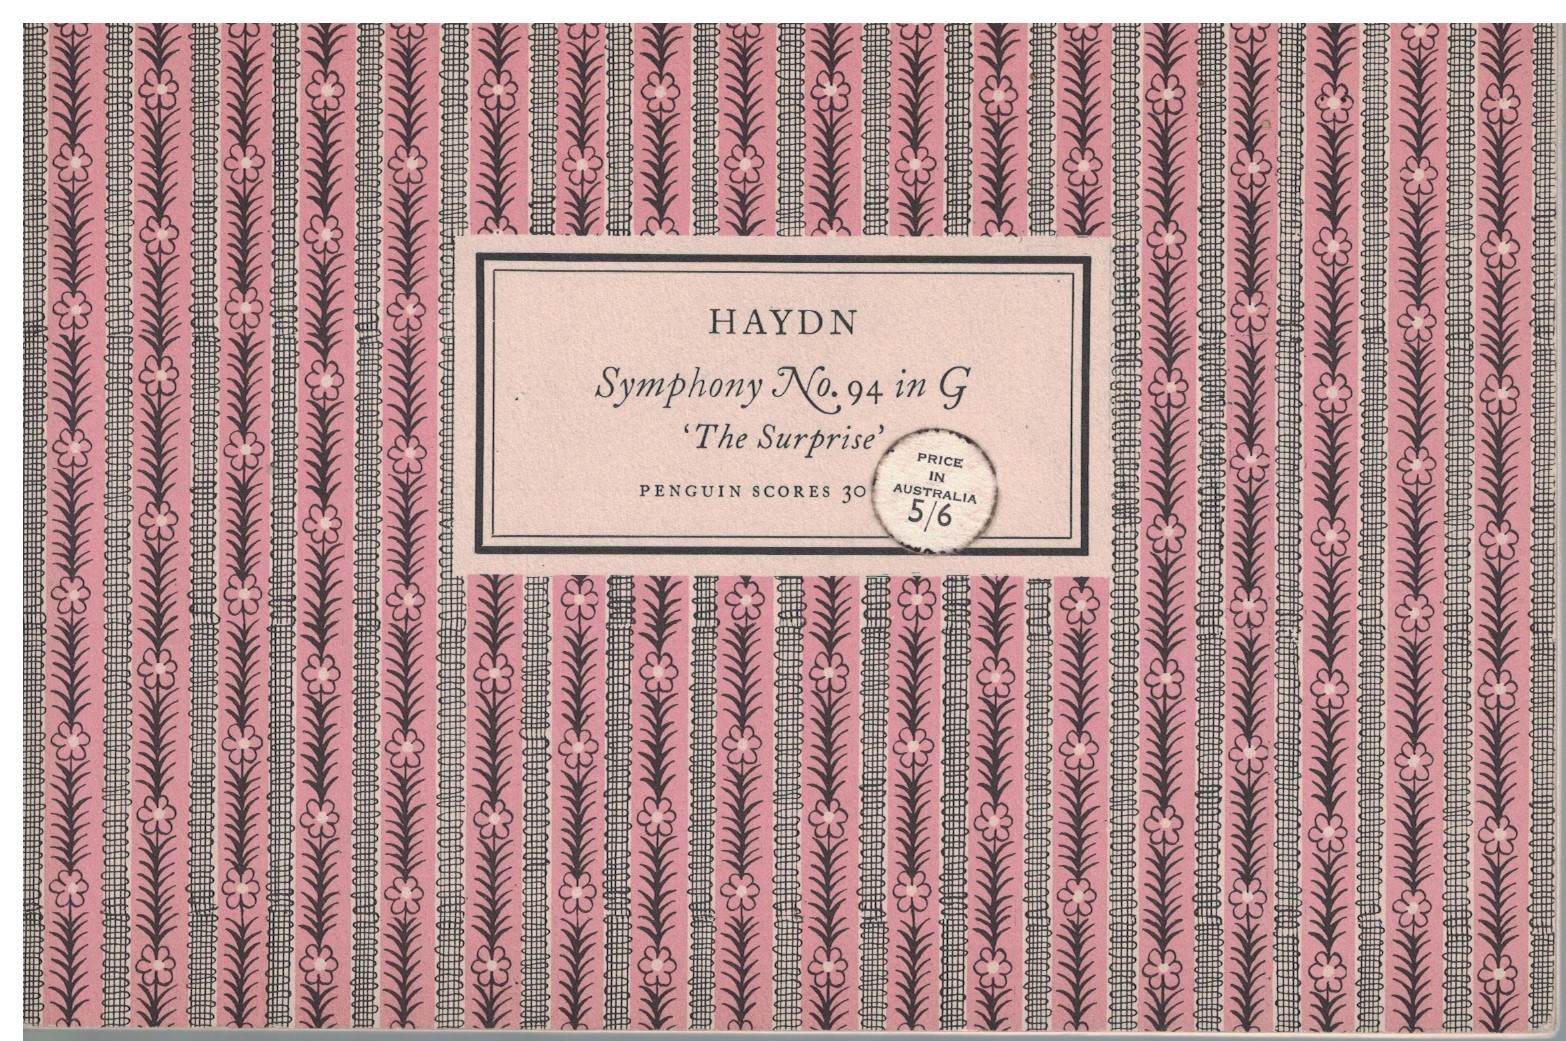 Haydn Symphony No. 94 in G 'The Surprise' for Orchestra Miniature Study Score